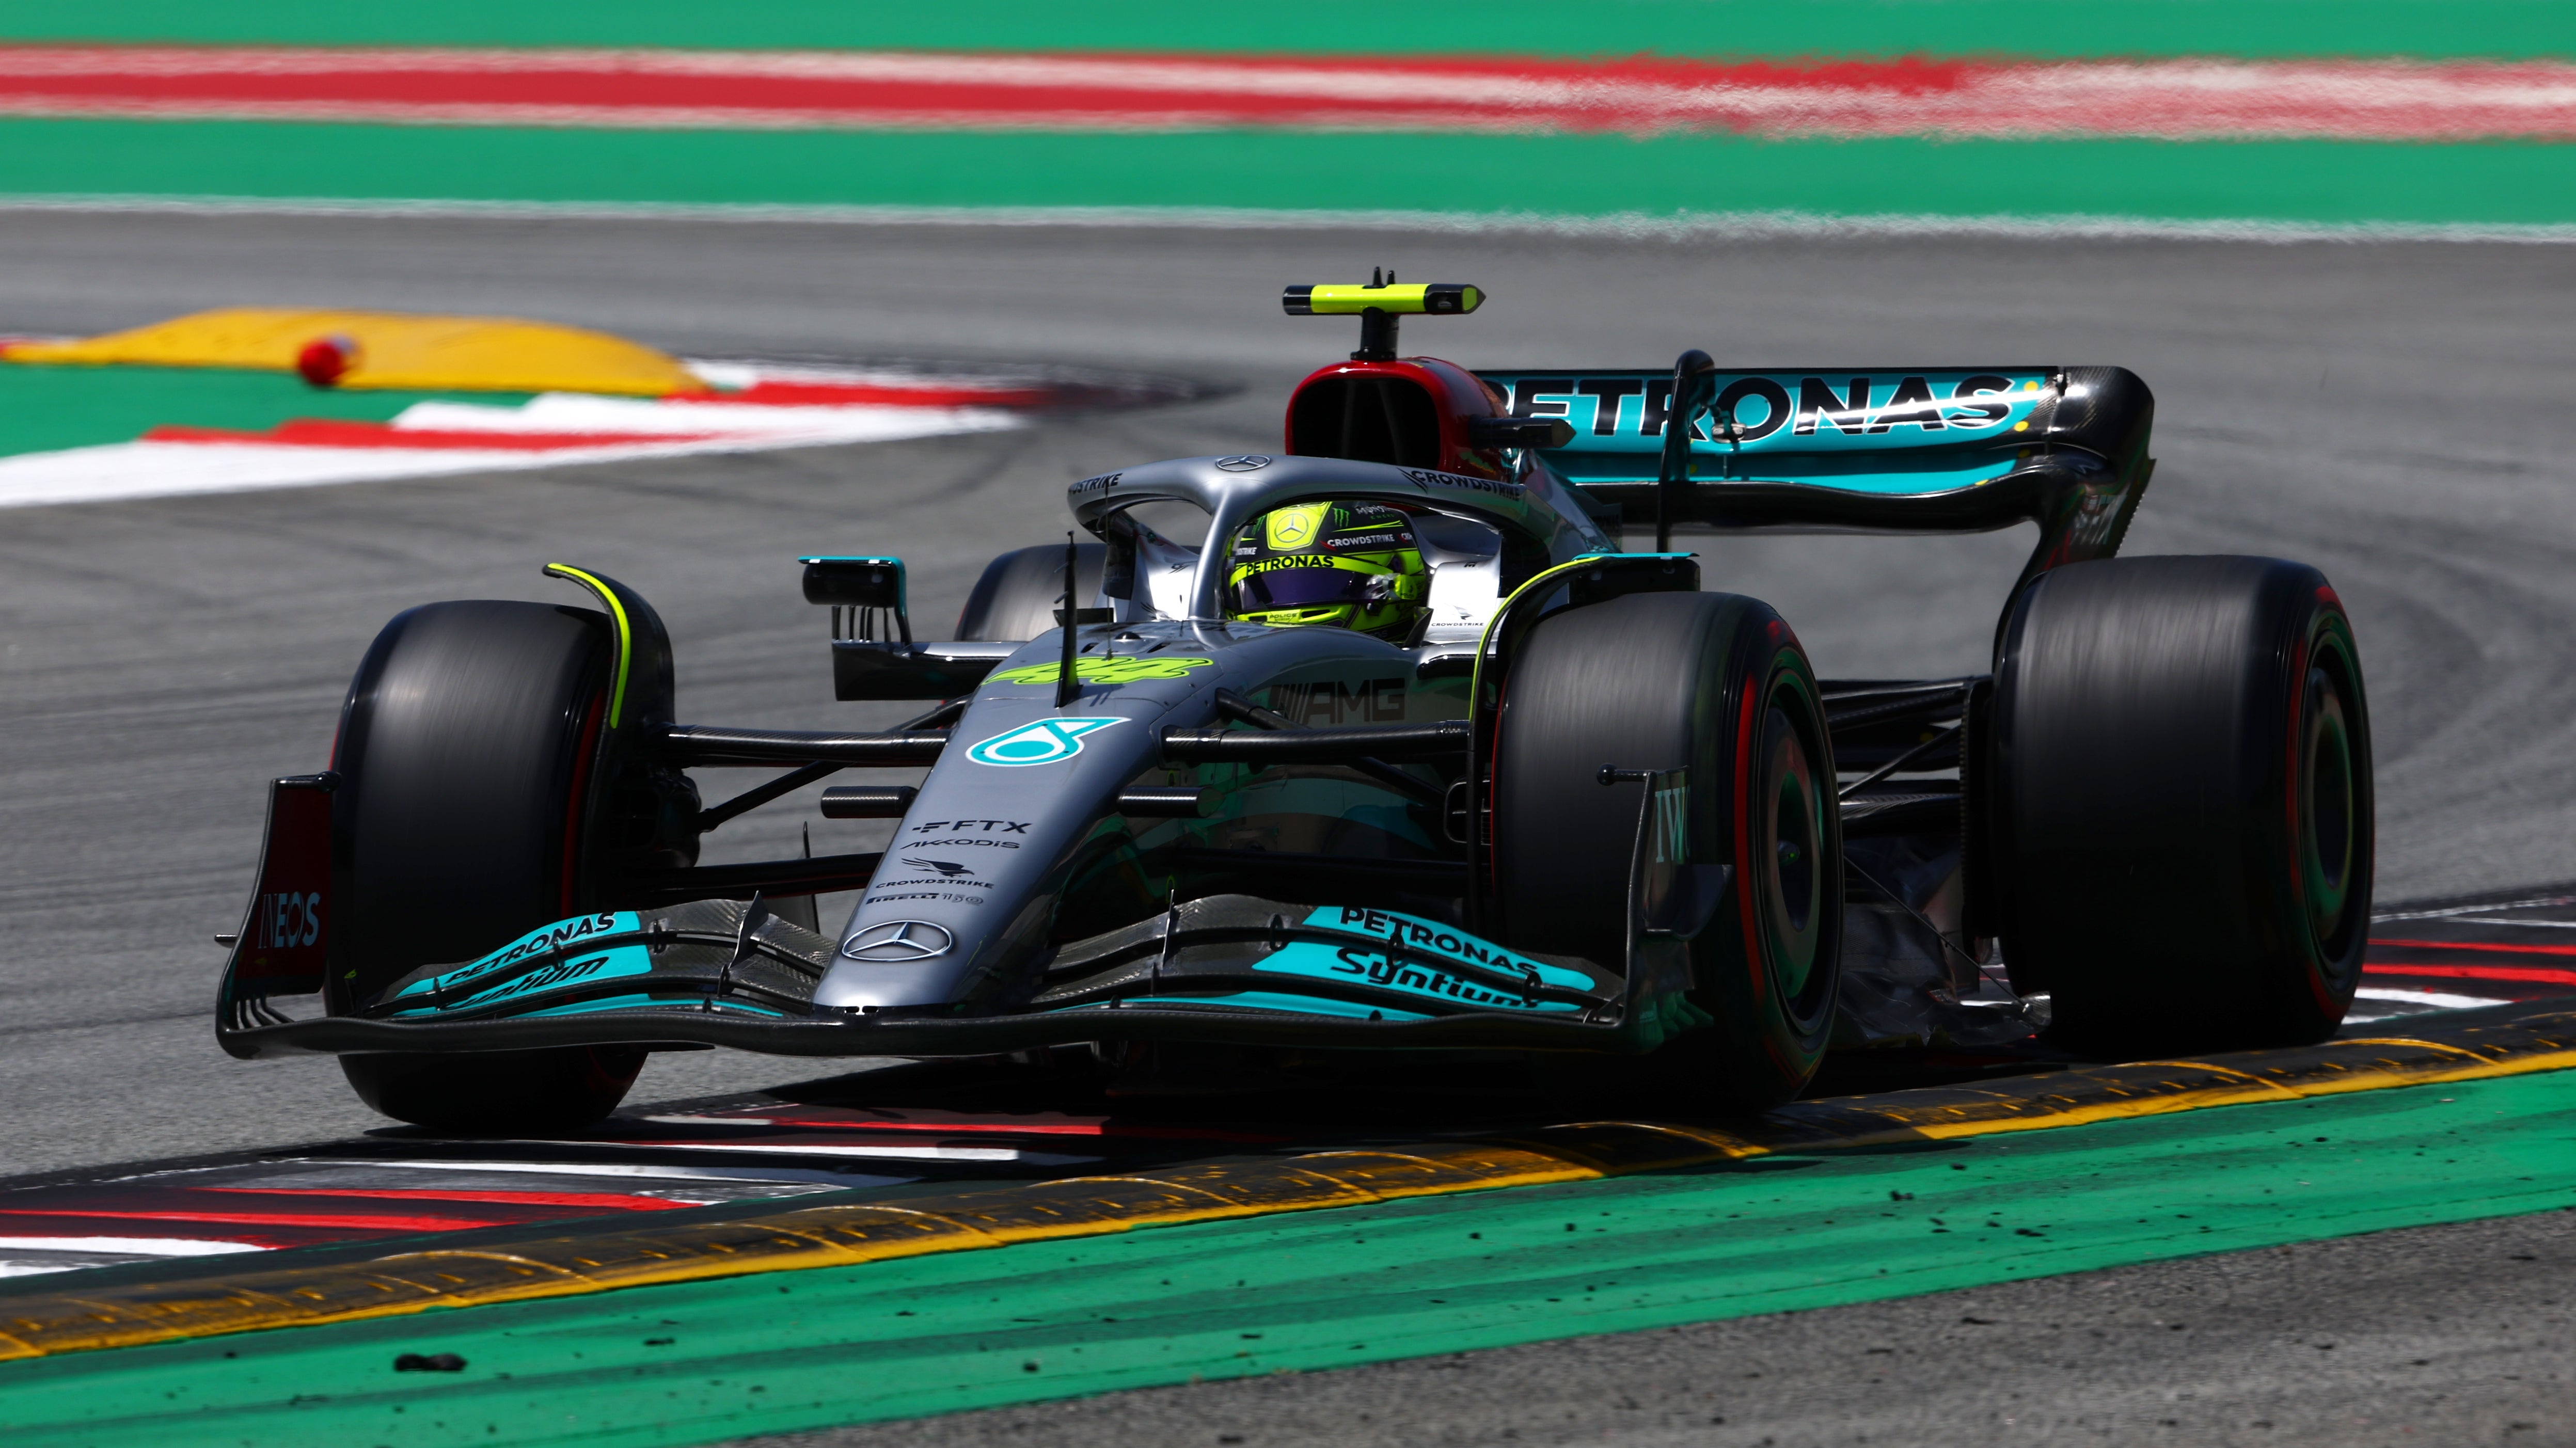 Lewis Hamilton will start the Spanish Grand Prix in sixth place